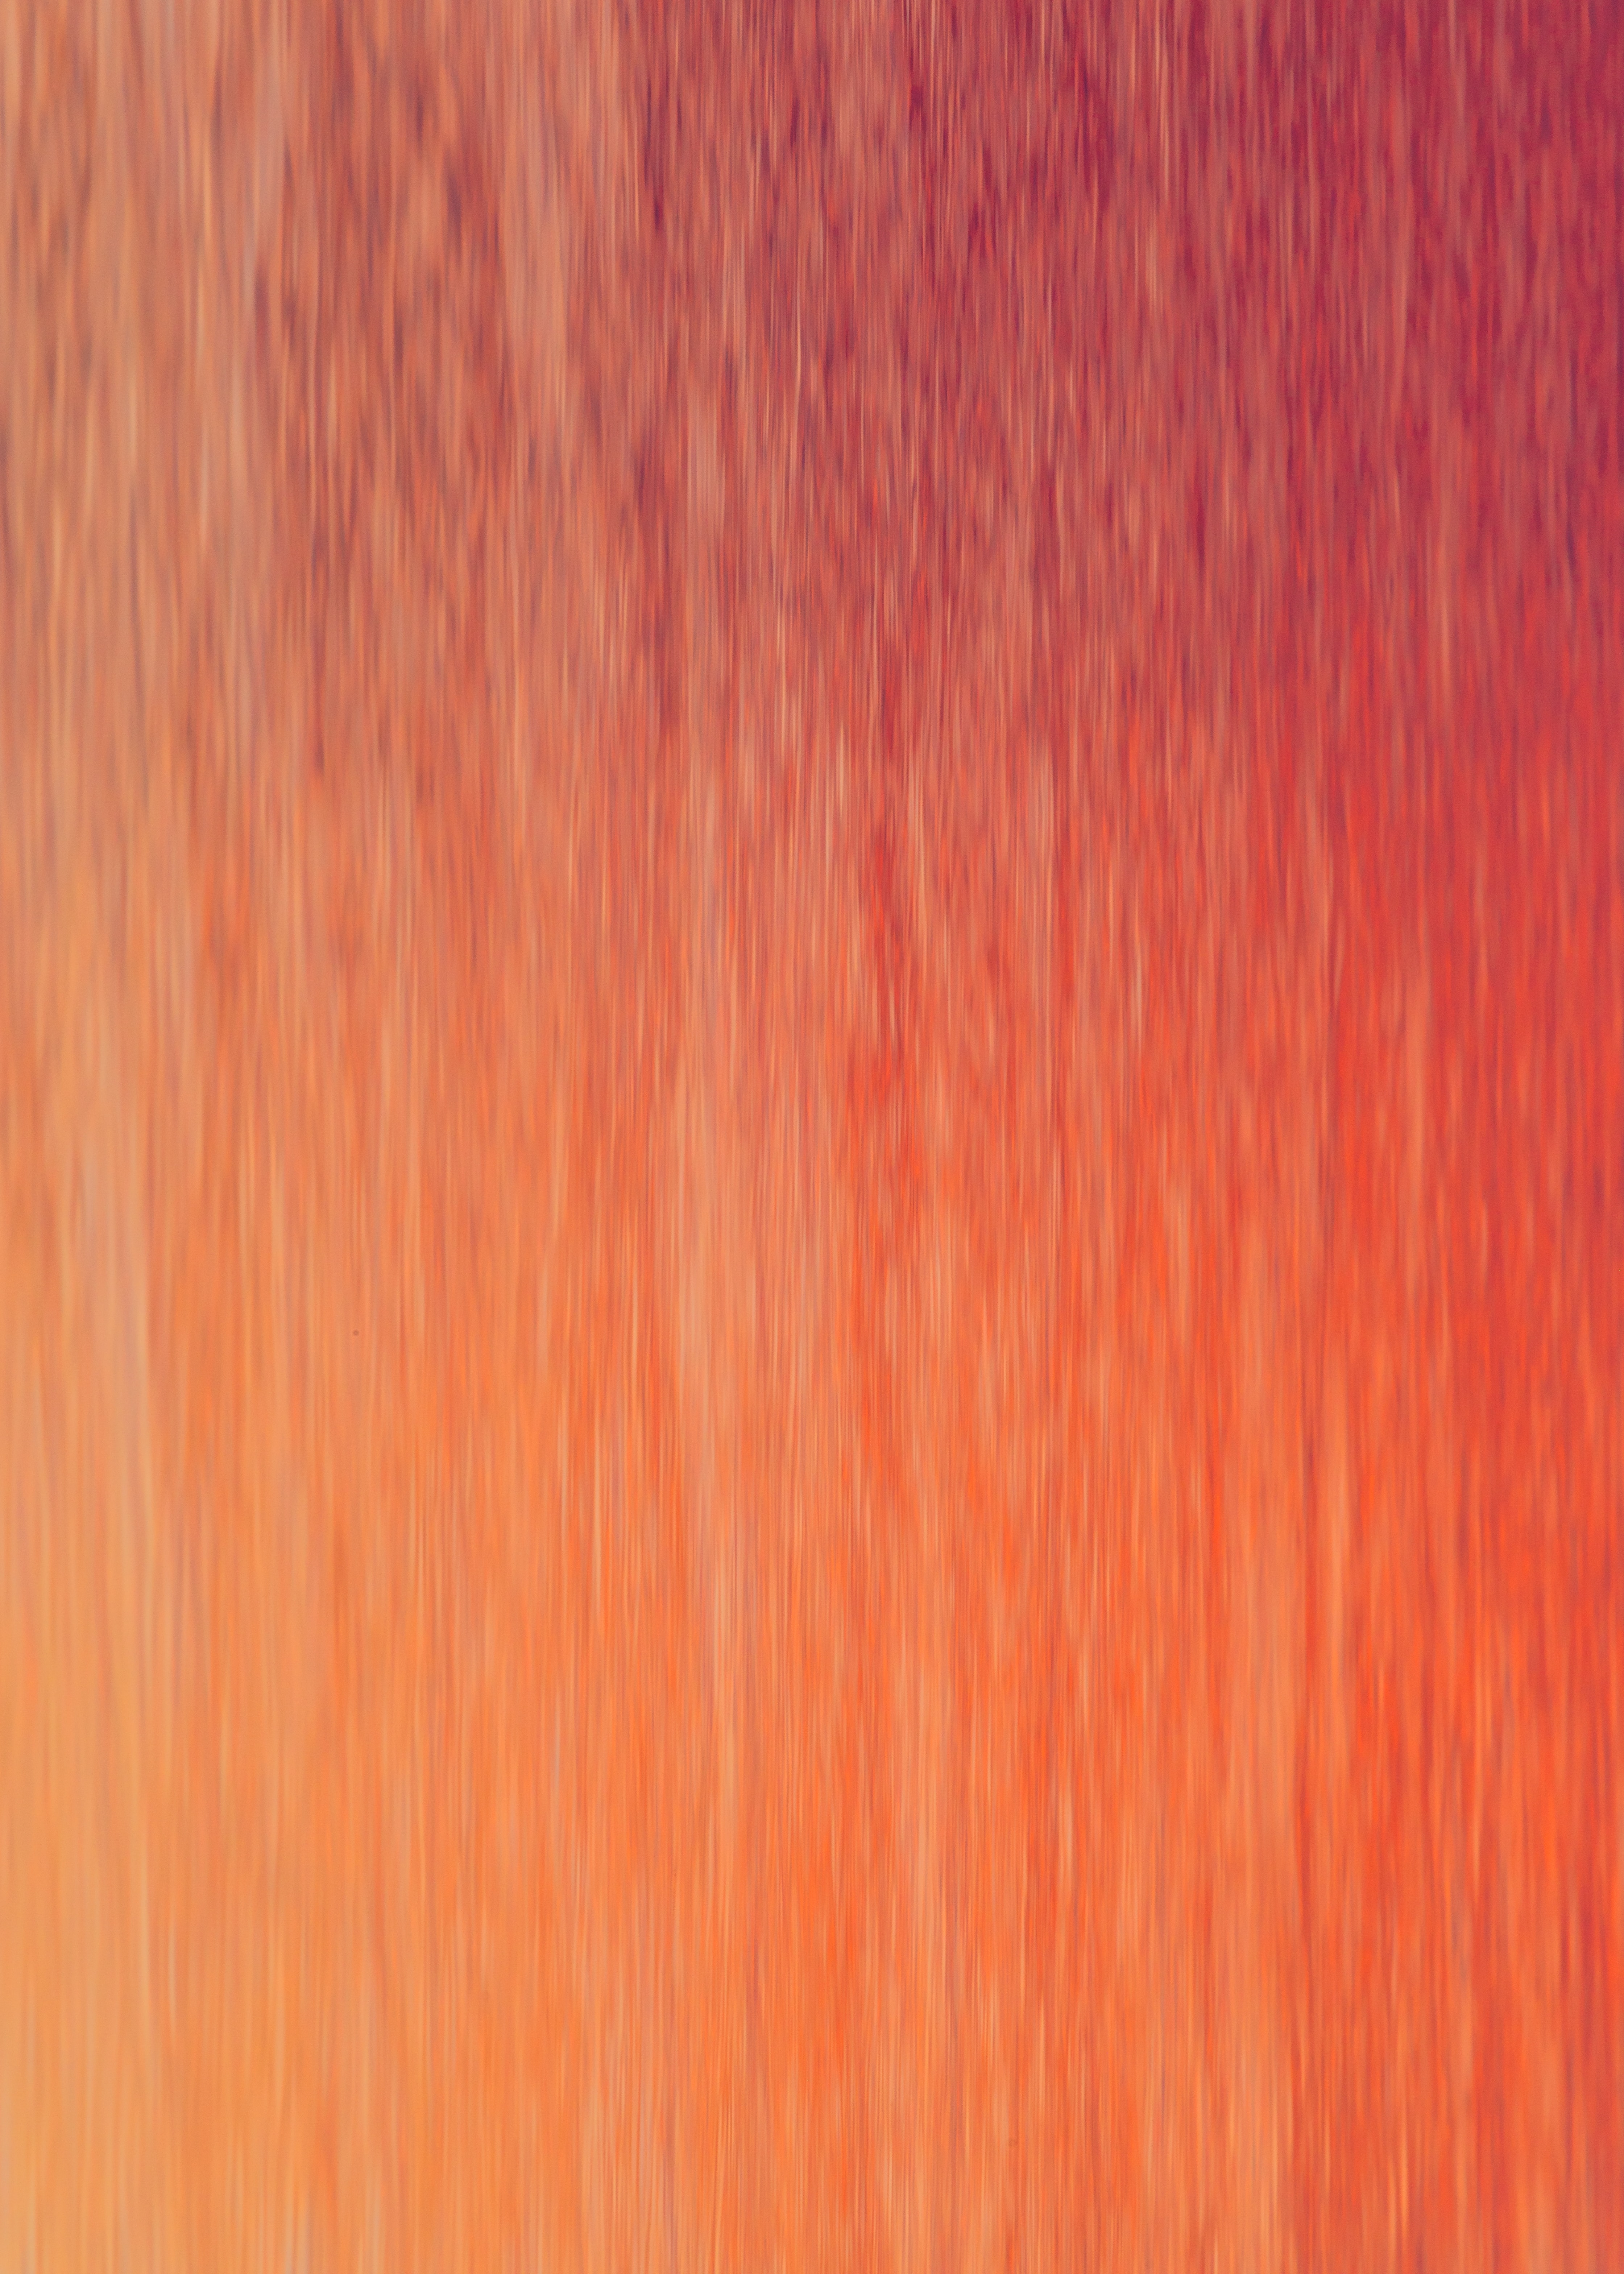 79010 free download Orange wallpapers for phone, smooth, blur, abstract Orange images and screensavers for mobile